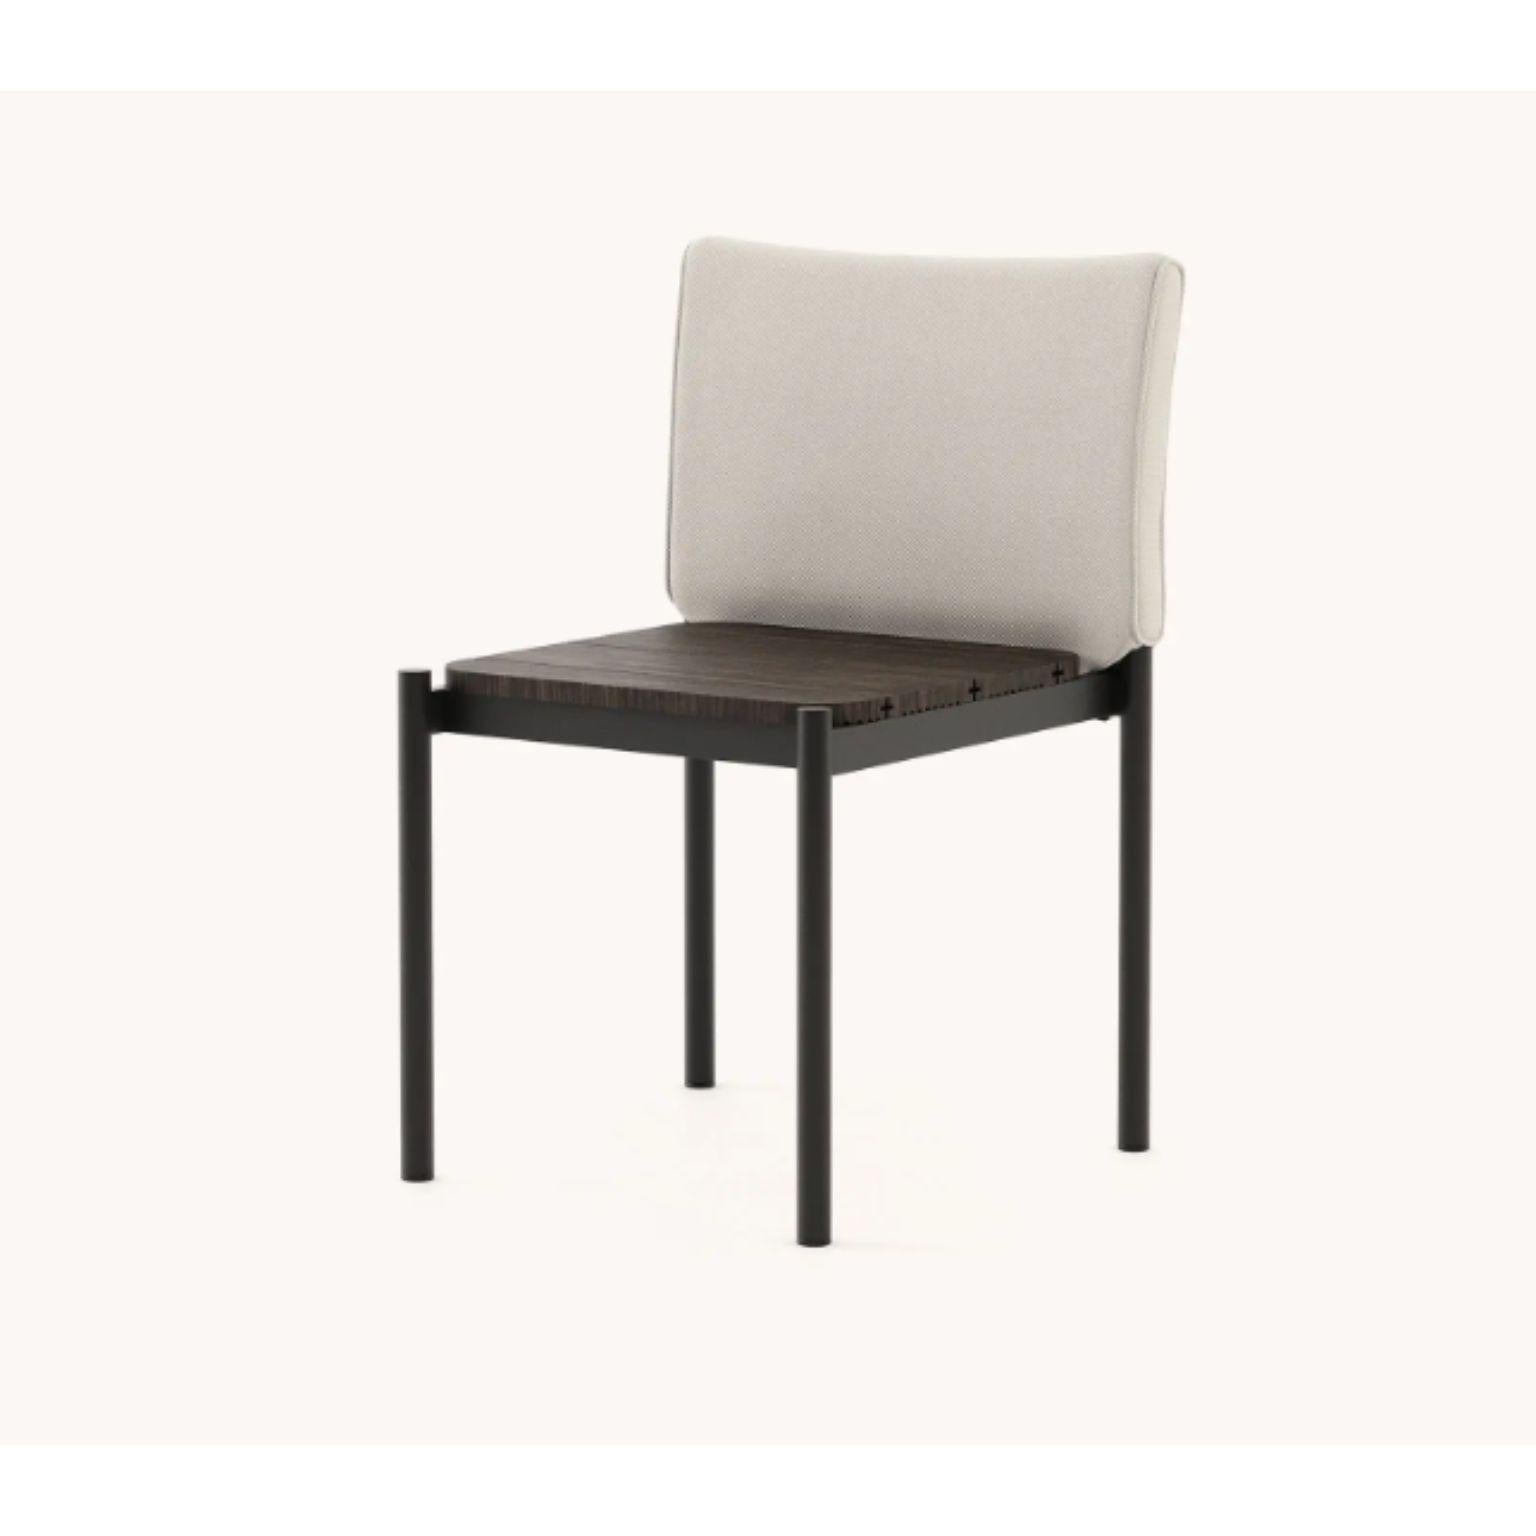 Copacabana chair without armrest by Domkapa
Materials: Black texturized stainless steel, bamboo wood, fabric (Rhine Ice).
Dimensions: W 55 x D 55.5 x H 84.5 cm.
Also available in different materials.

Copacabana chair is here to revolutionize